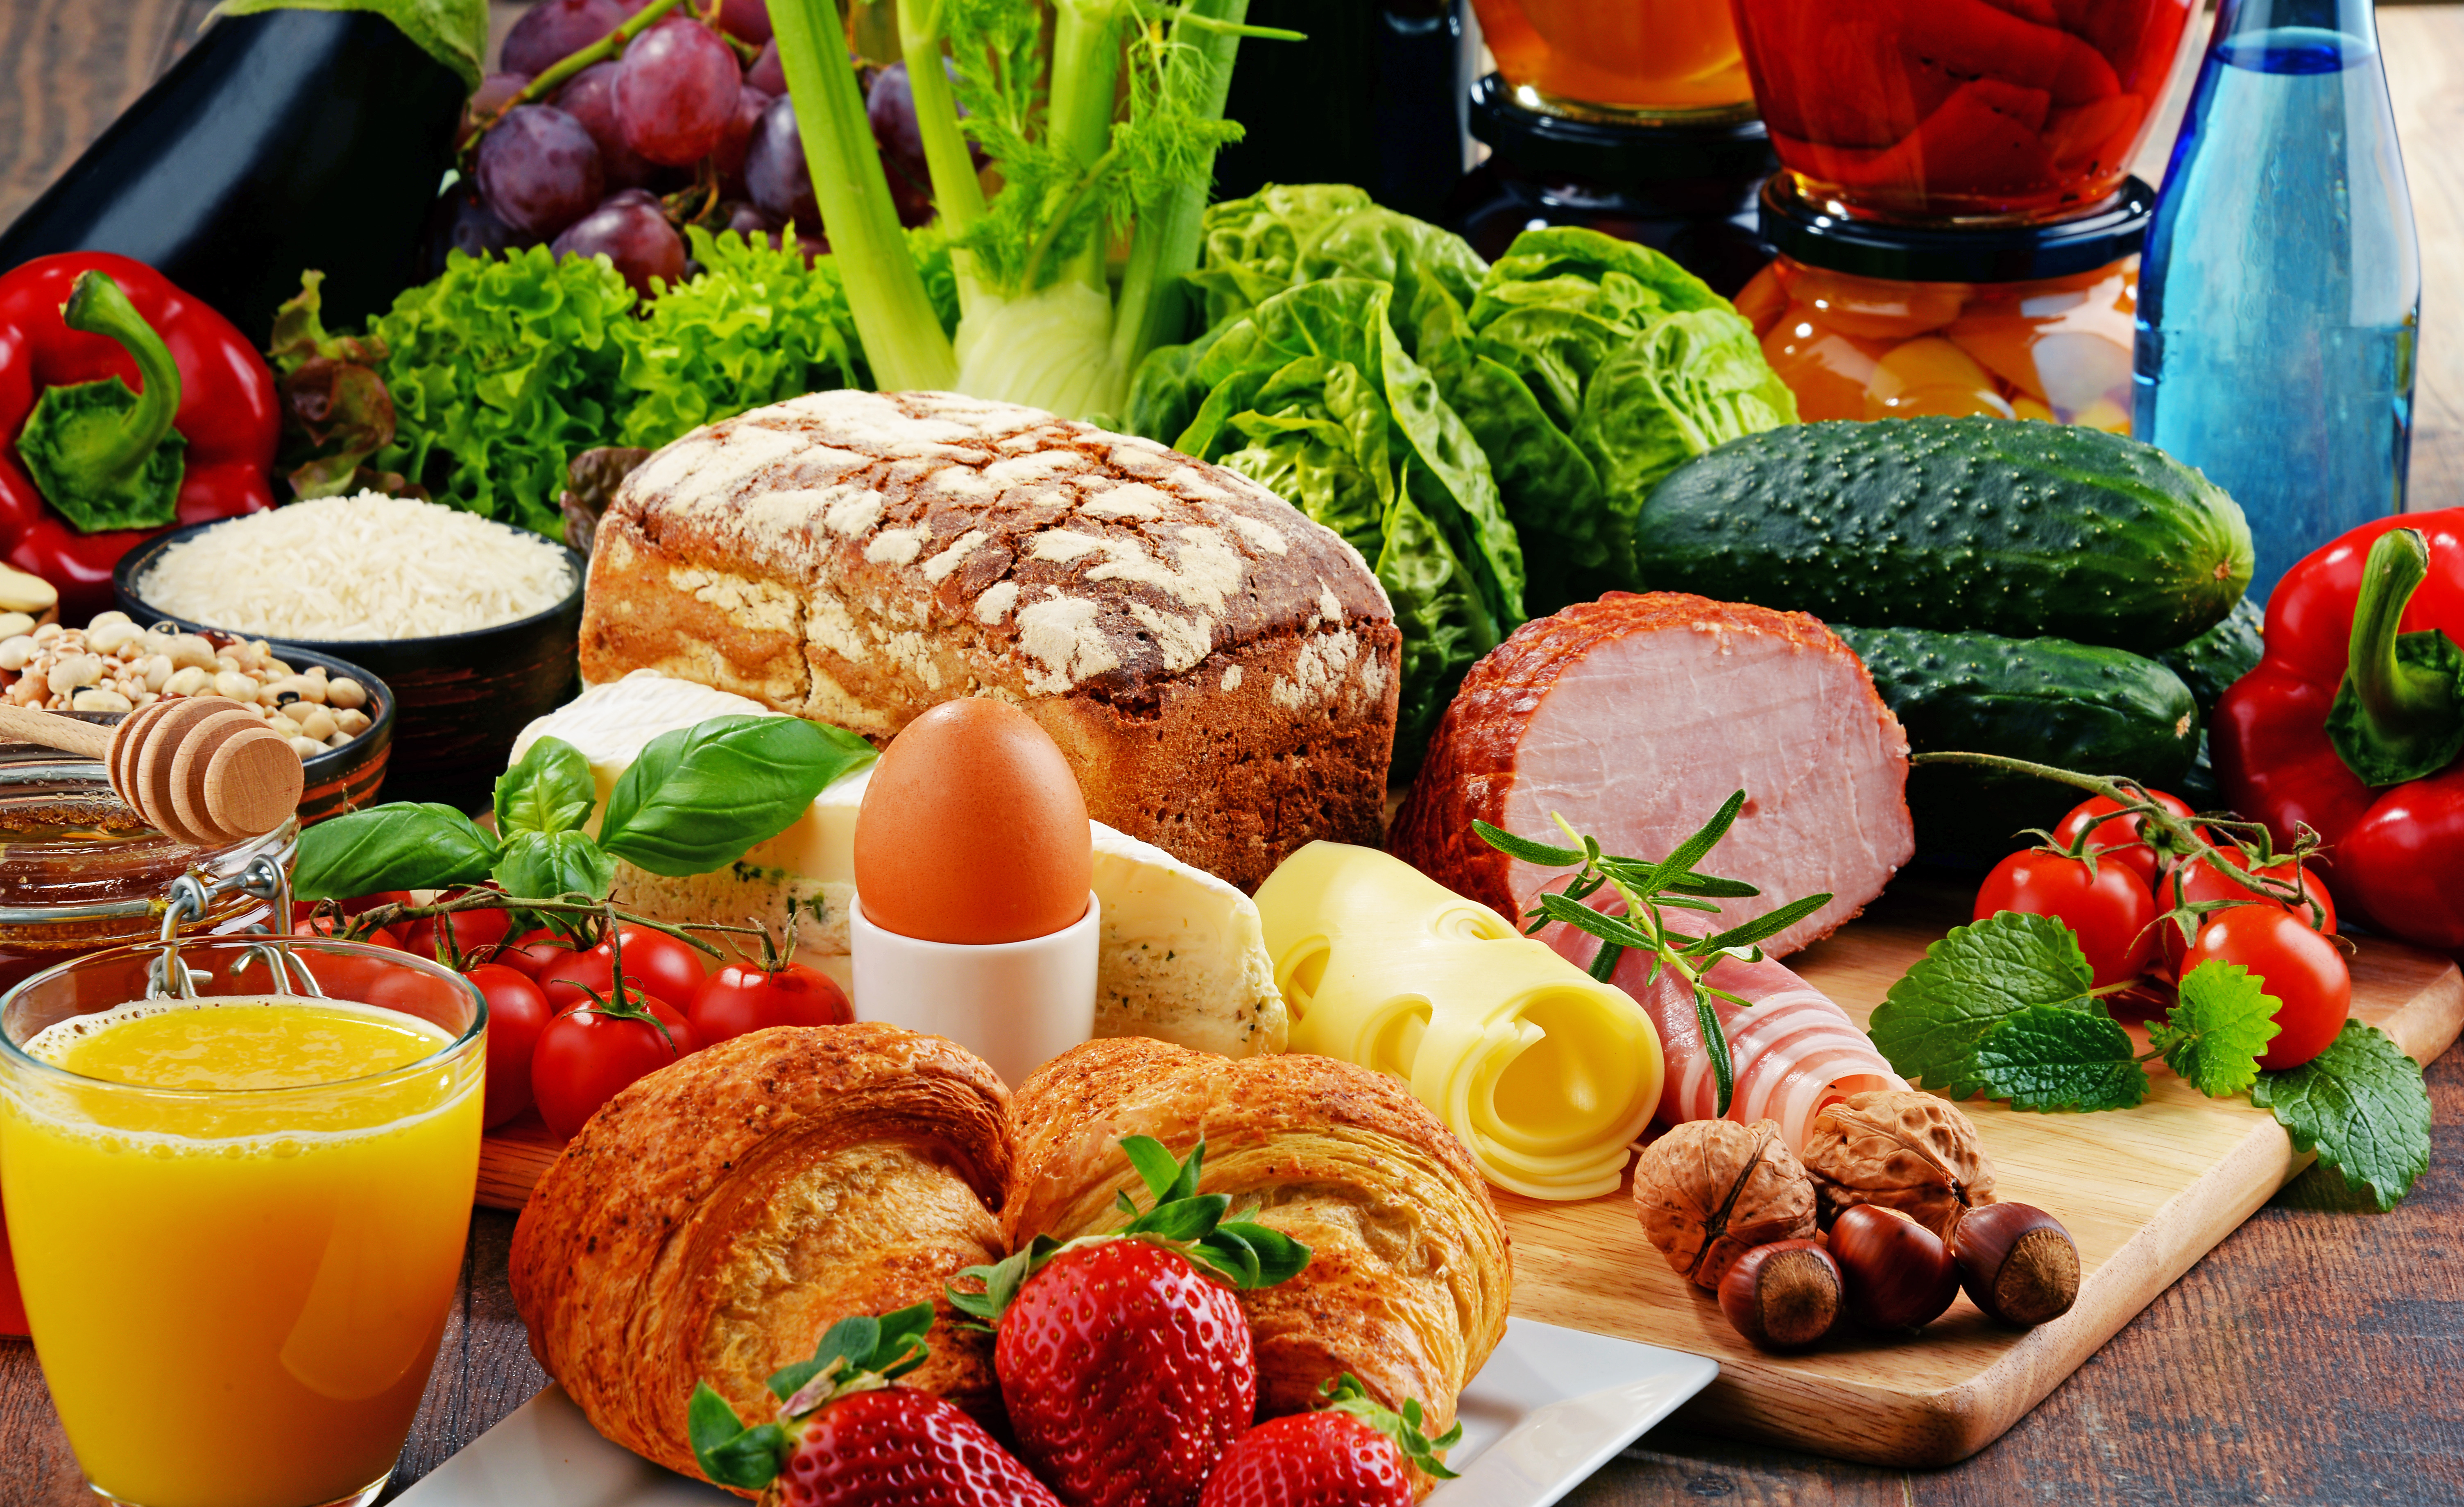 vegetable, bread, food, still life, cheese, croissant, egg, juice, meat, strawberry